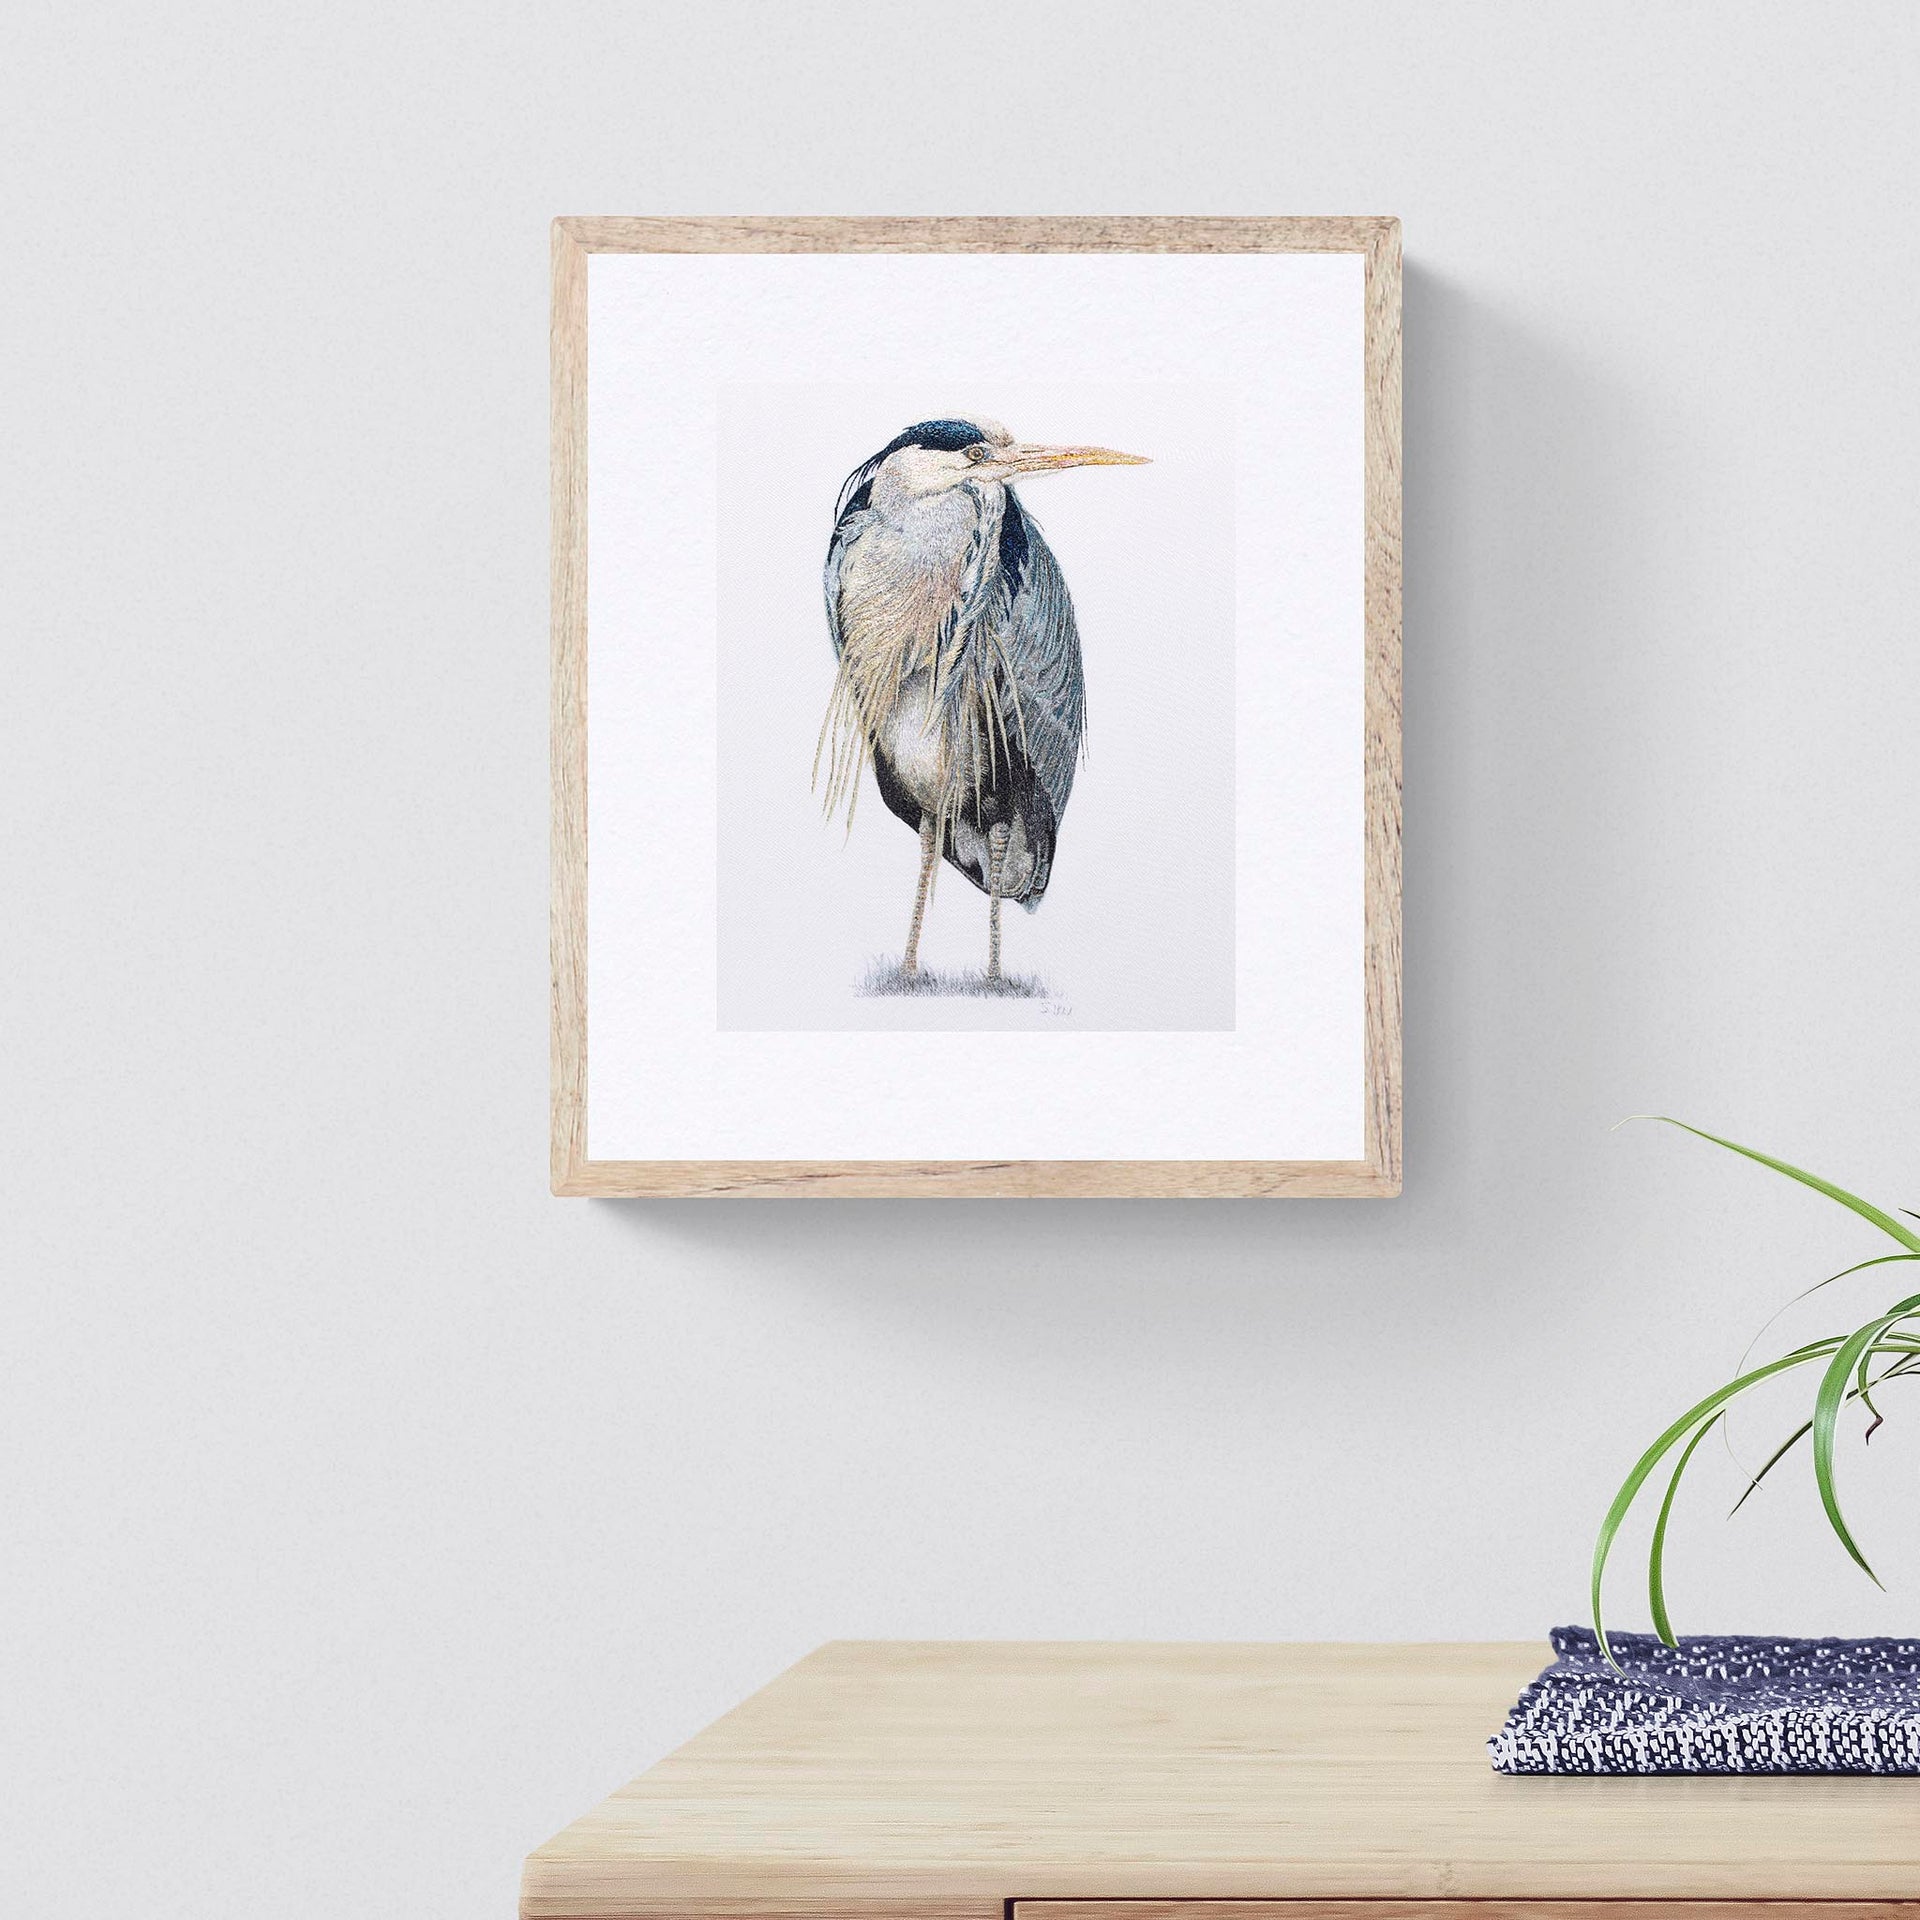 Heron hand embroidered limited edition print in frame on the wall